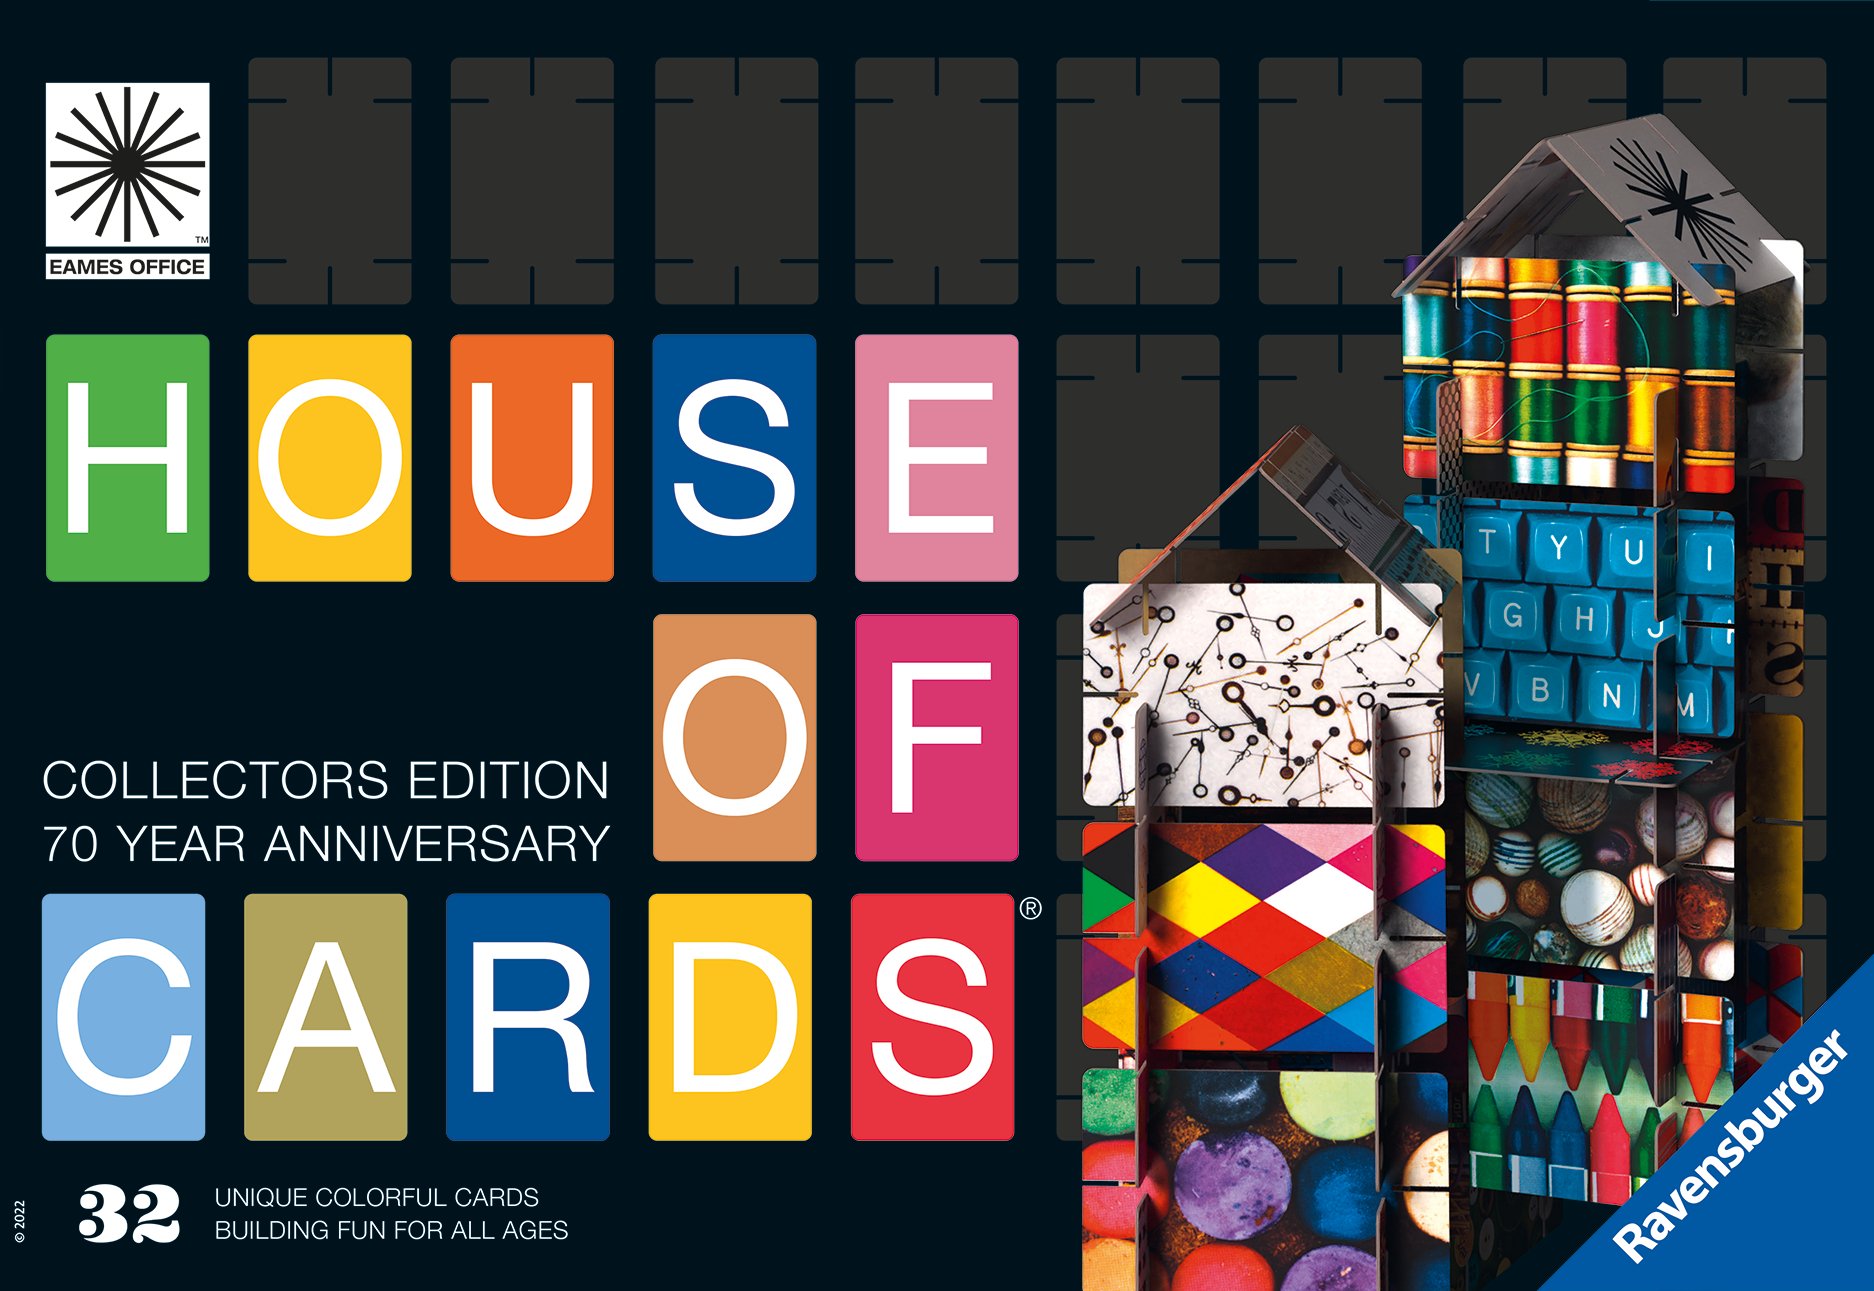 Class Up Your Poker Night With This Card Deck From the Design Legends At  the Eames Office and Art of Play – PRINT Magazine